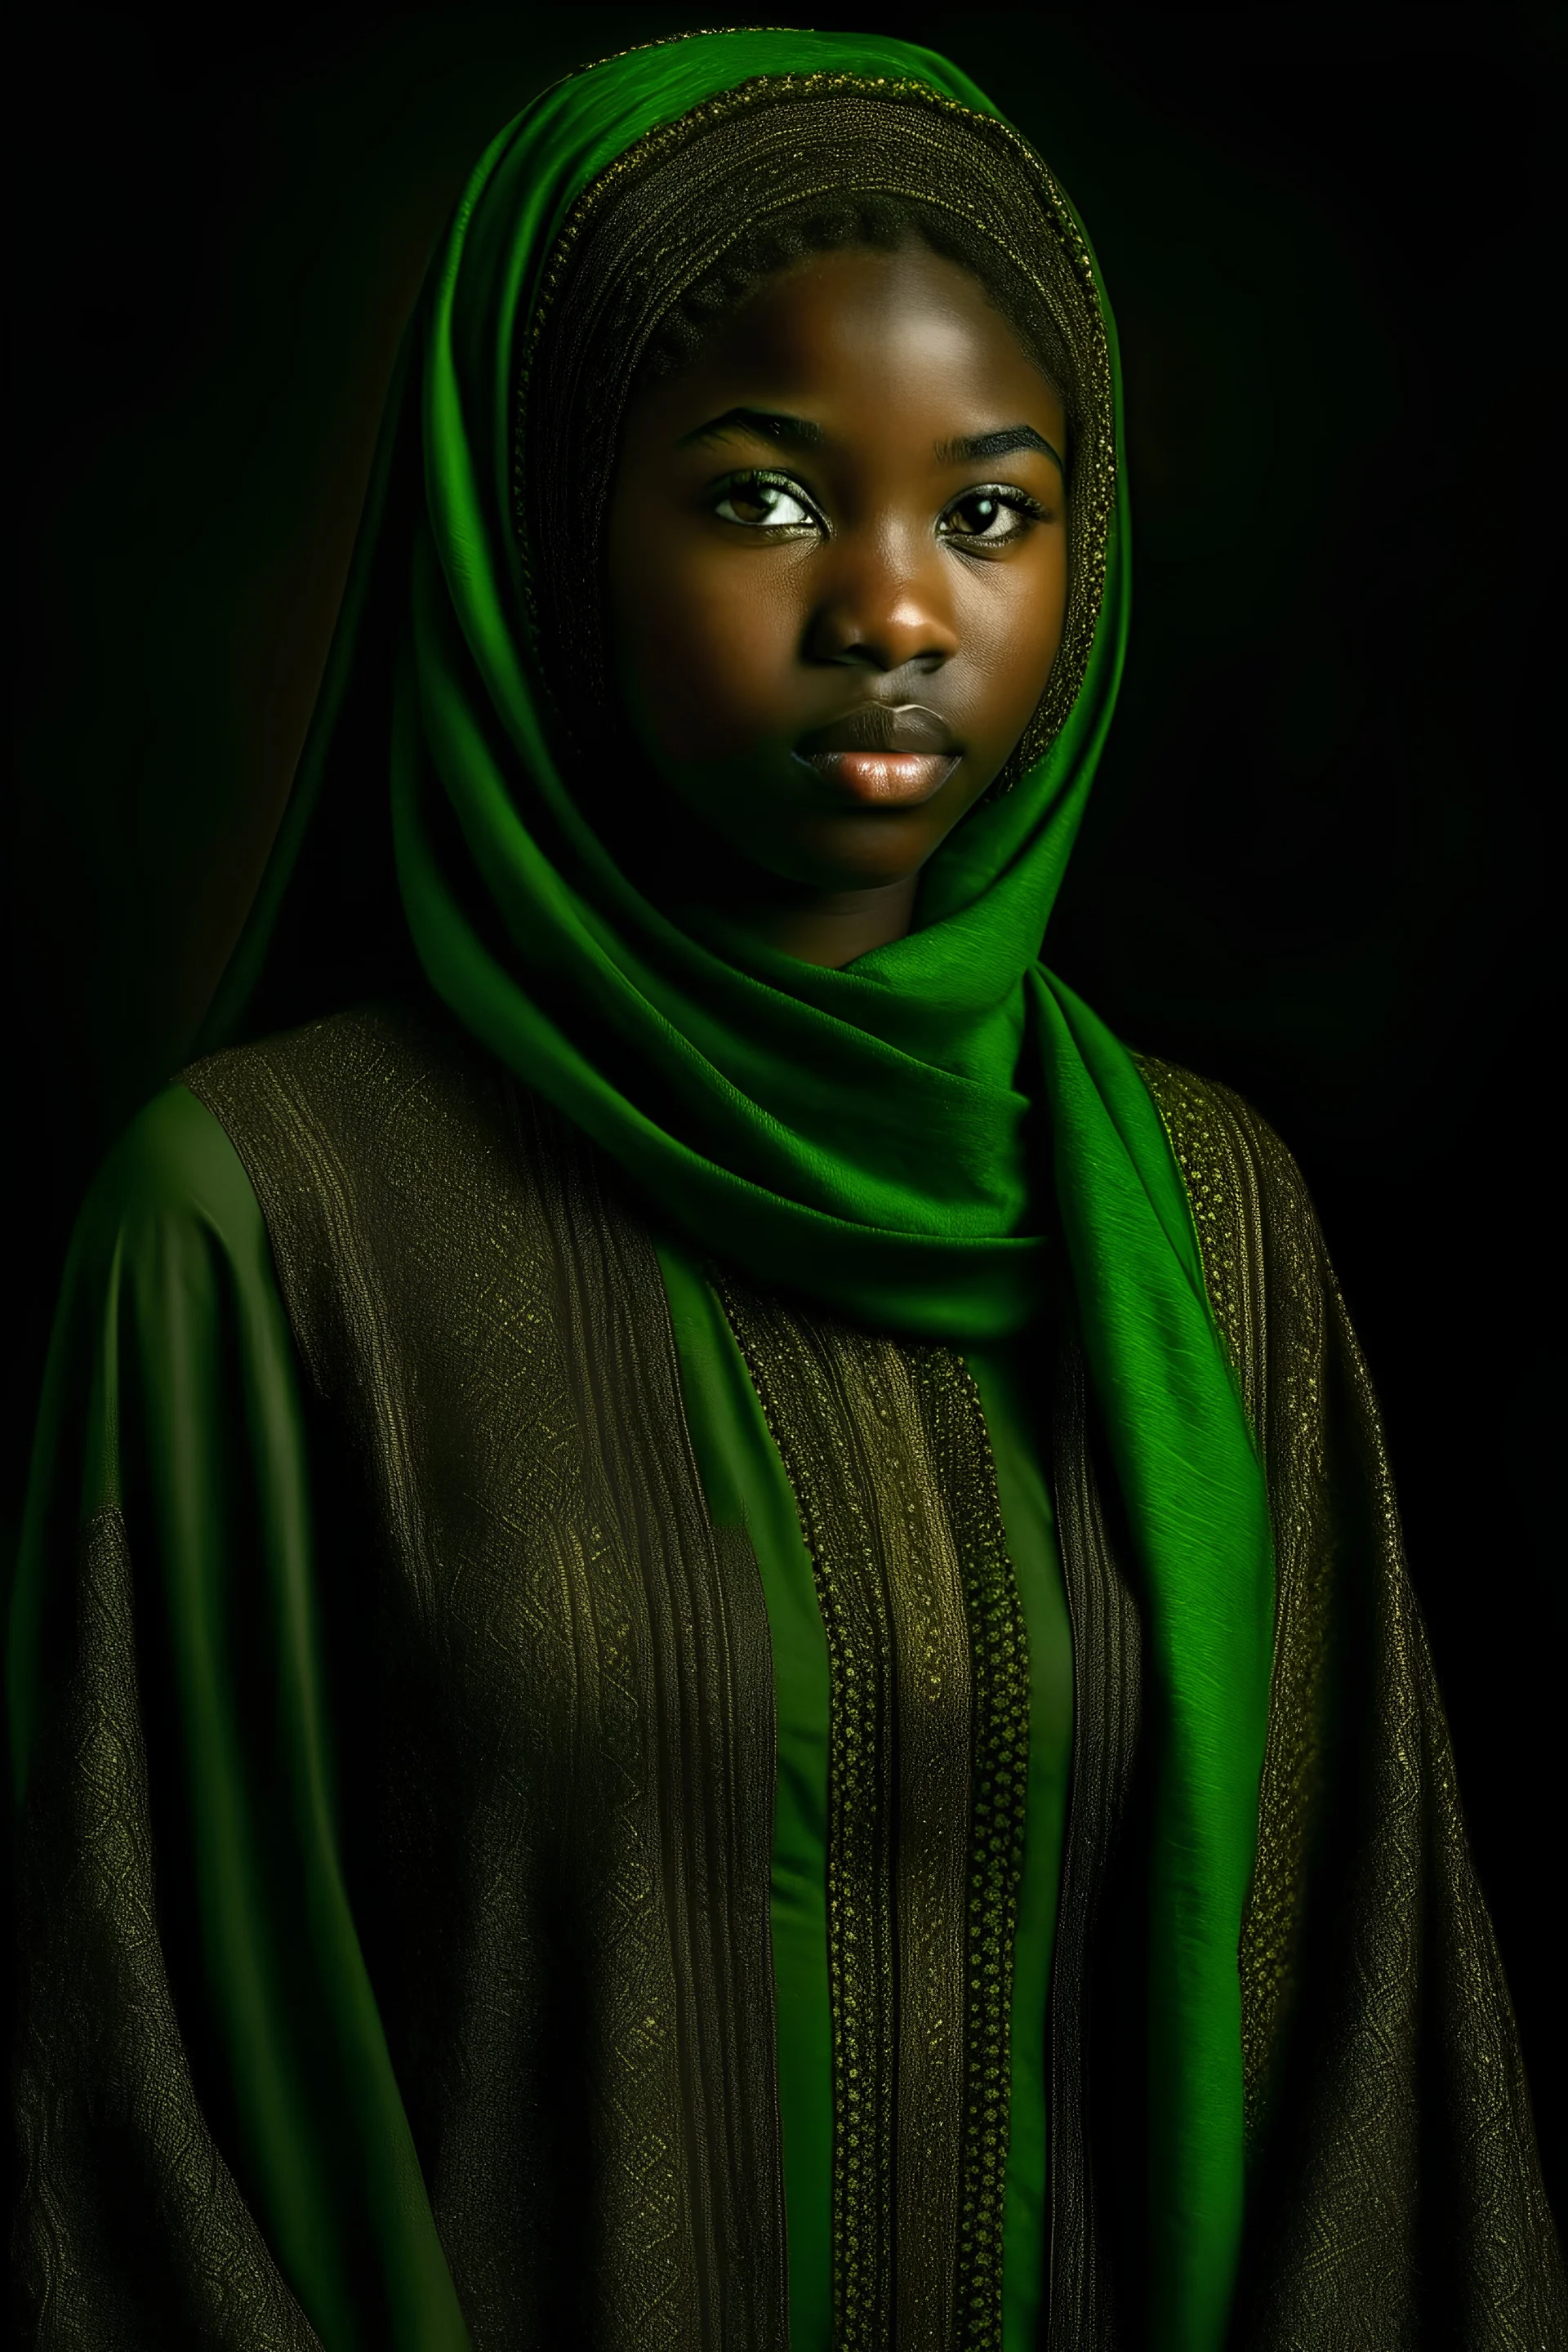 A veiled Muslim girl with calm features. Her eyes are brown with a wheat-coloured complexion. She looks forward. The focus is on the waist of the dress. The girl’s features are African-Arab features. She wears a dark green satin dress with embroidery. The neckline defines the slim waist and highlights the beauty of her slim waist. It is decorated on the chest. The sleeves are made of dark green satin. A mannequin with a delicate decoration. High quality, the consistency between the size of the d